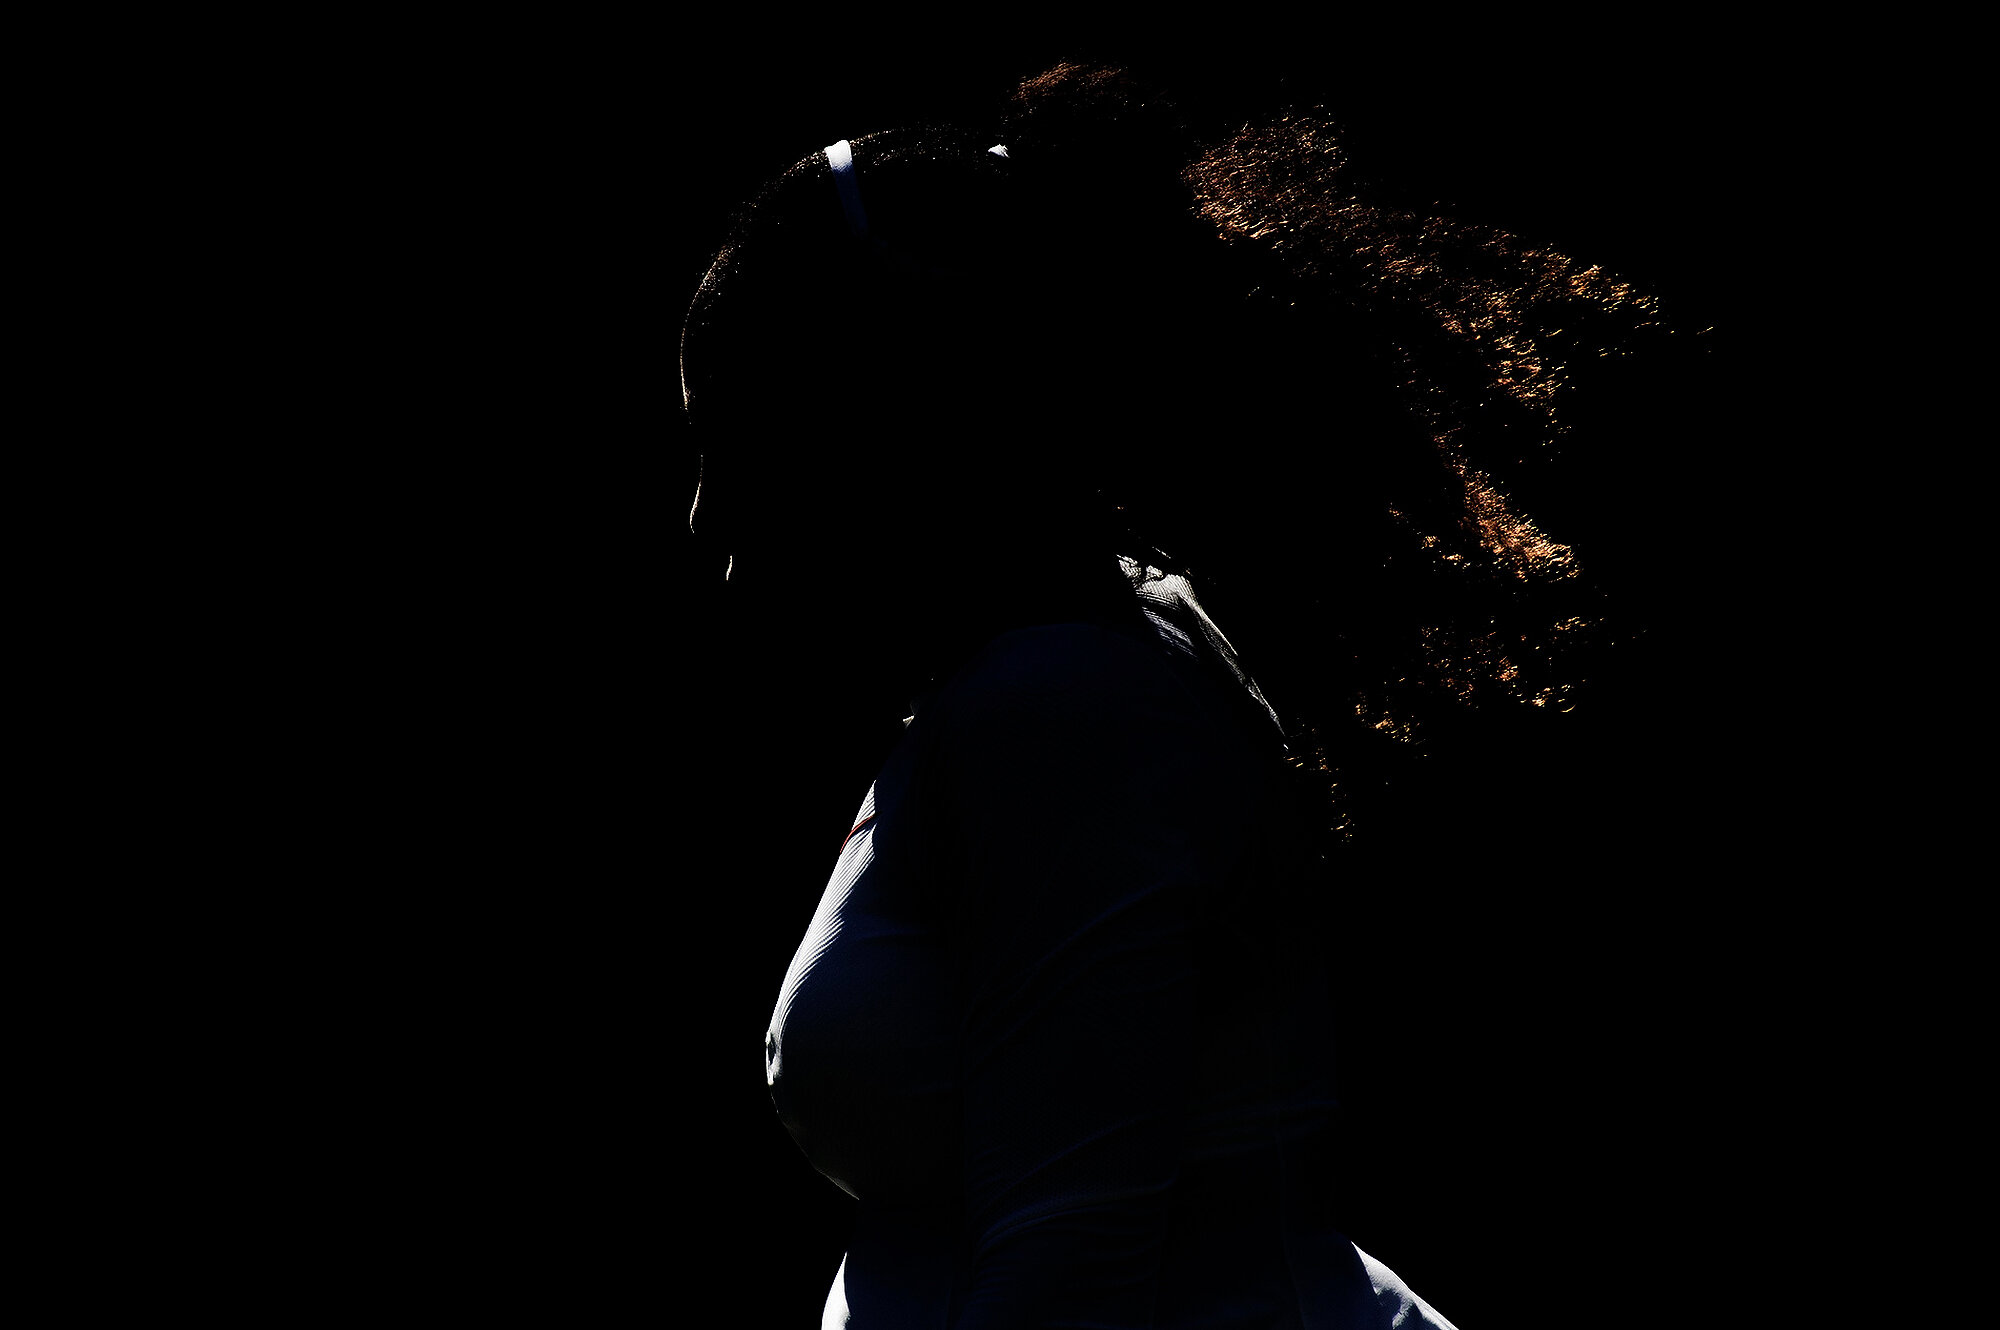  Serena Williams playing against Arantxa Rus in the first round of the Ladies Singles on No1 Court during The Championships at the All England Lawn Tennis Club, Wimbledon. Photo: Eddie Mulholland/The Telegraph, 02 July 2018 